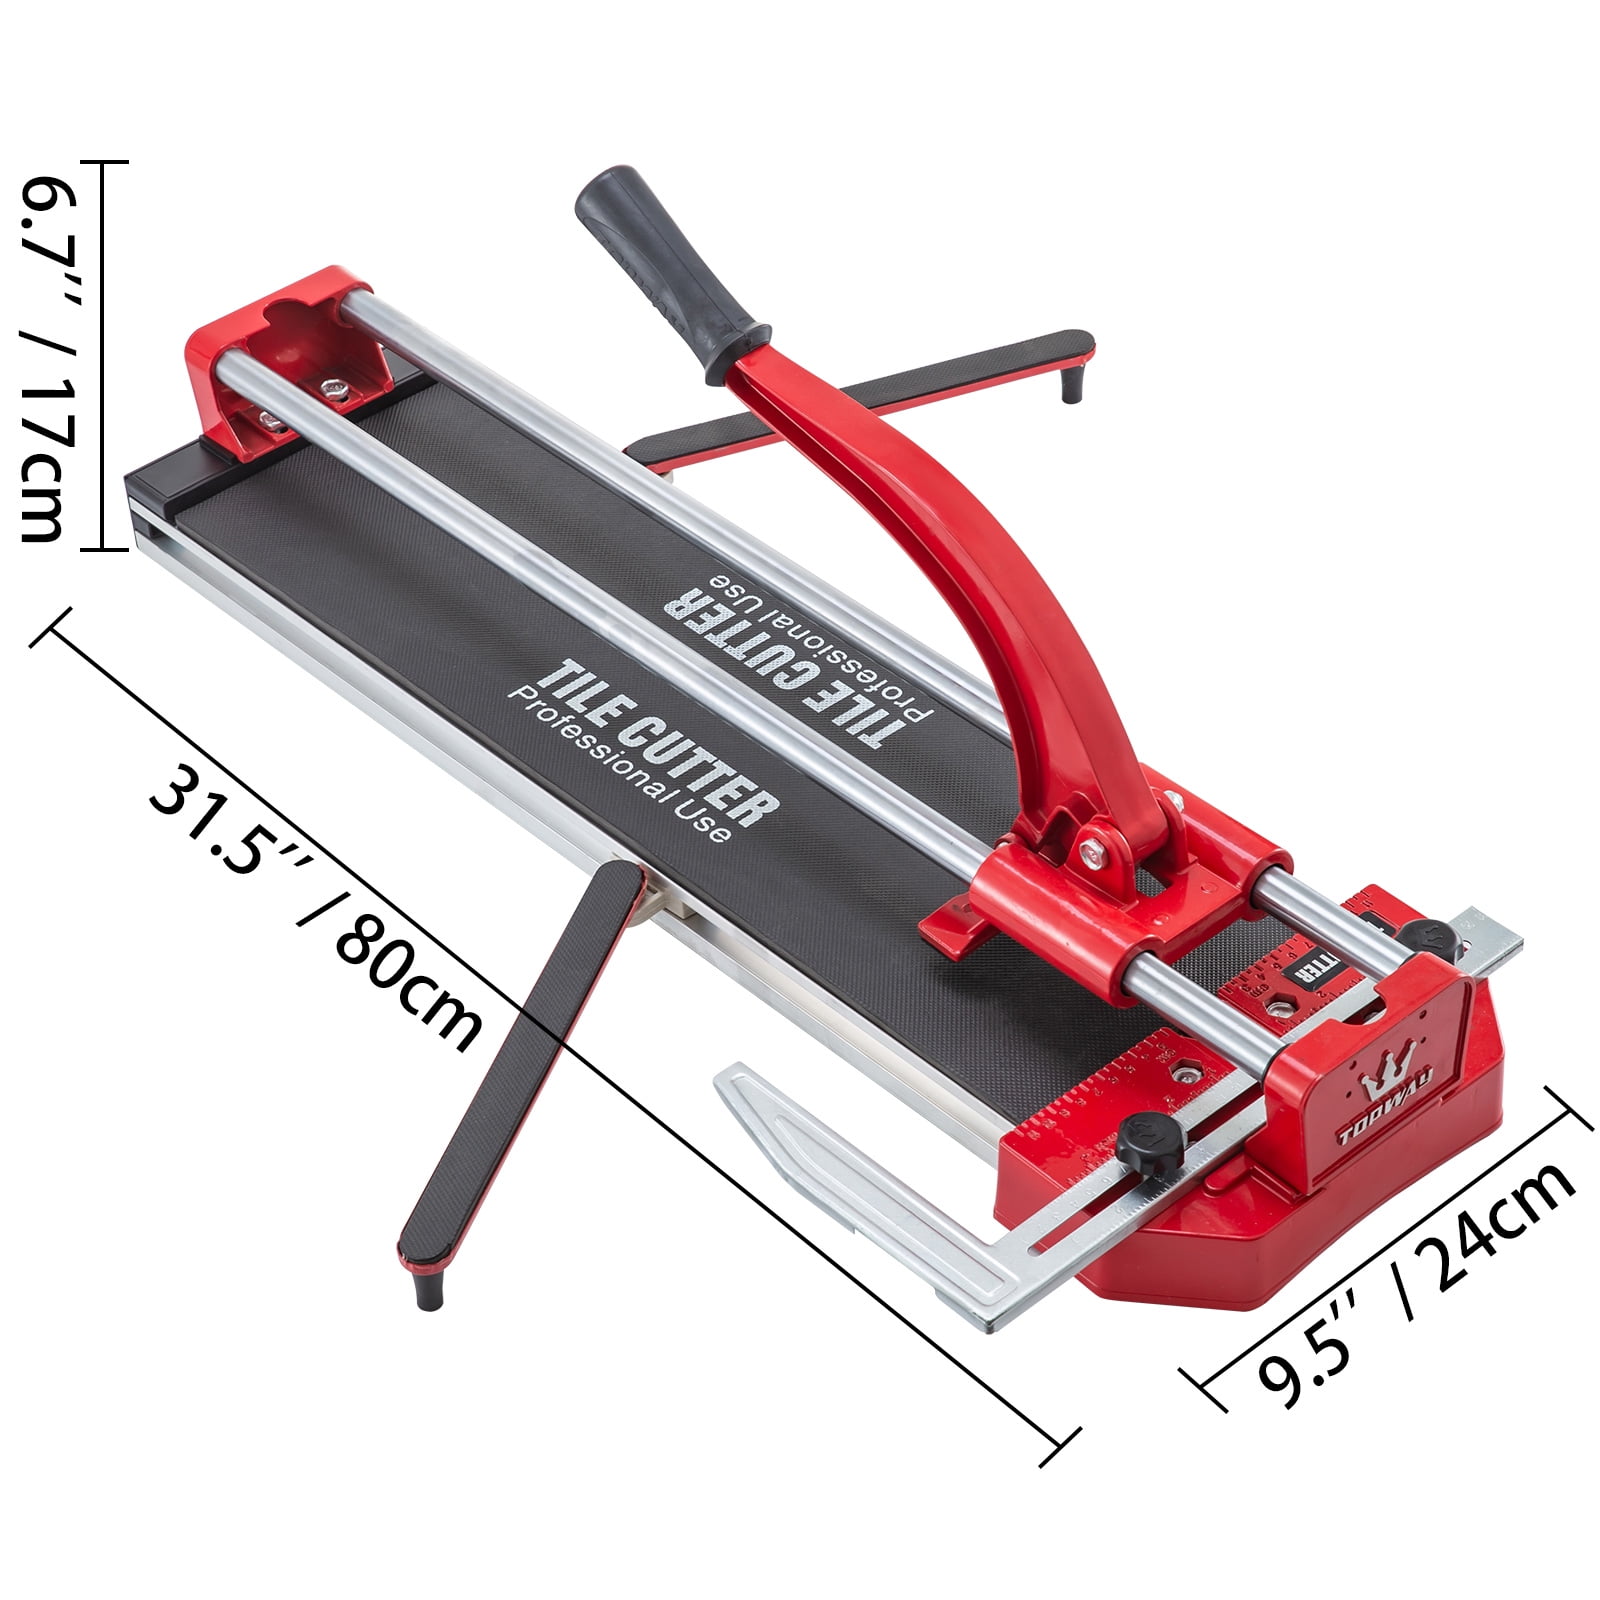 Wholesale 24 inch vinyl tile cutter Crafted To Perform Many Other